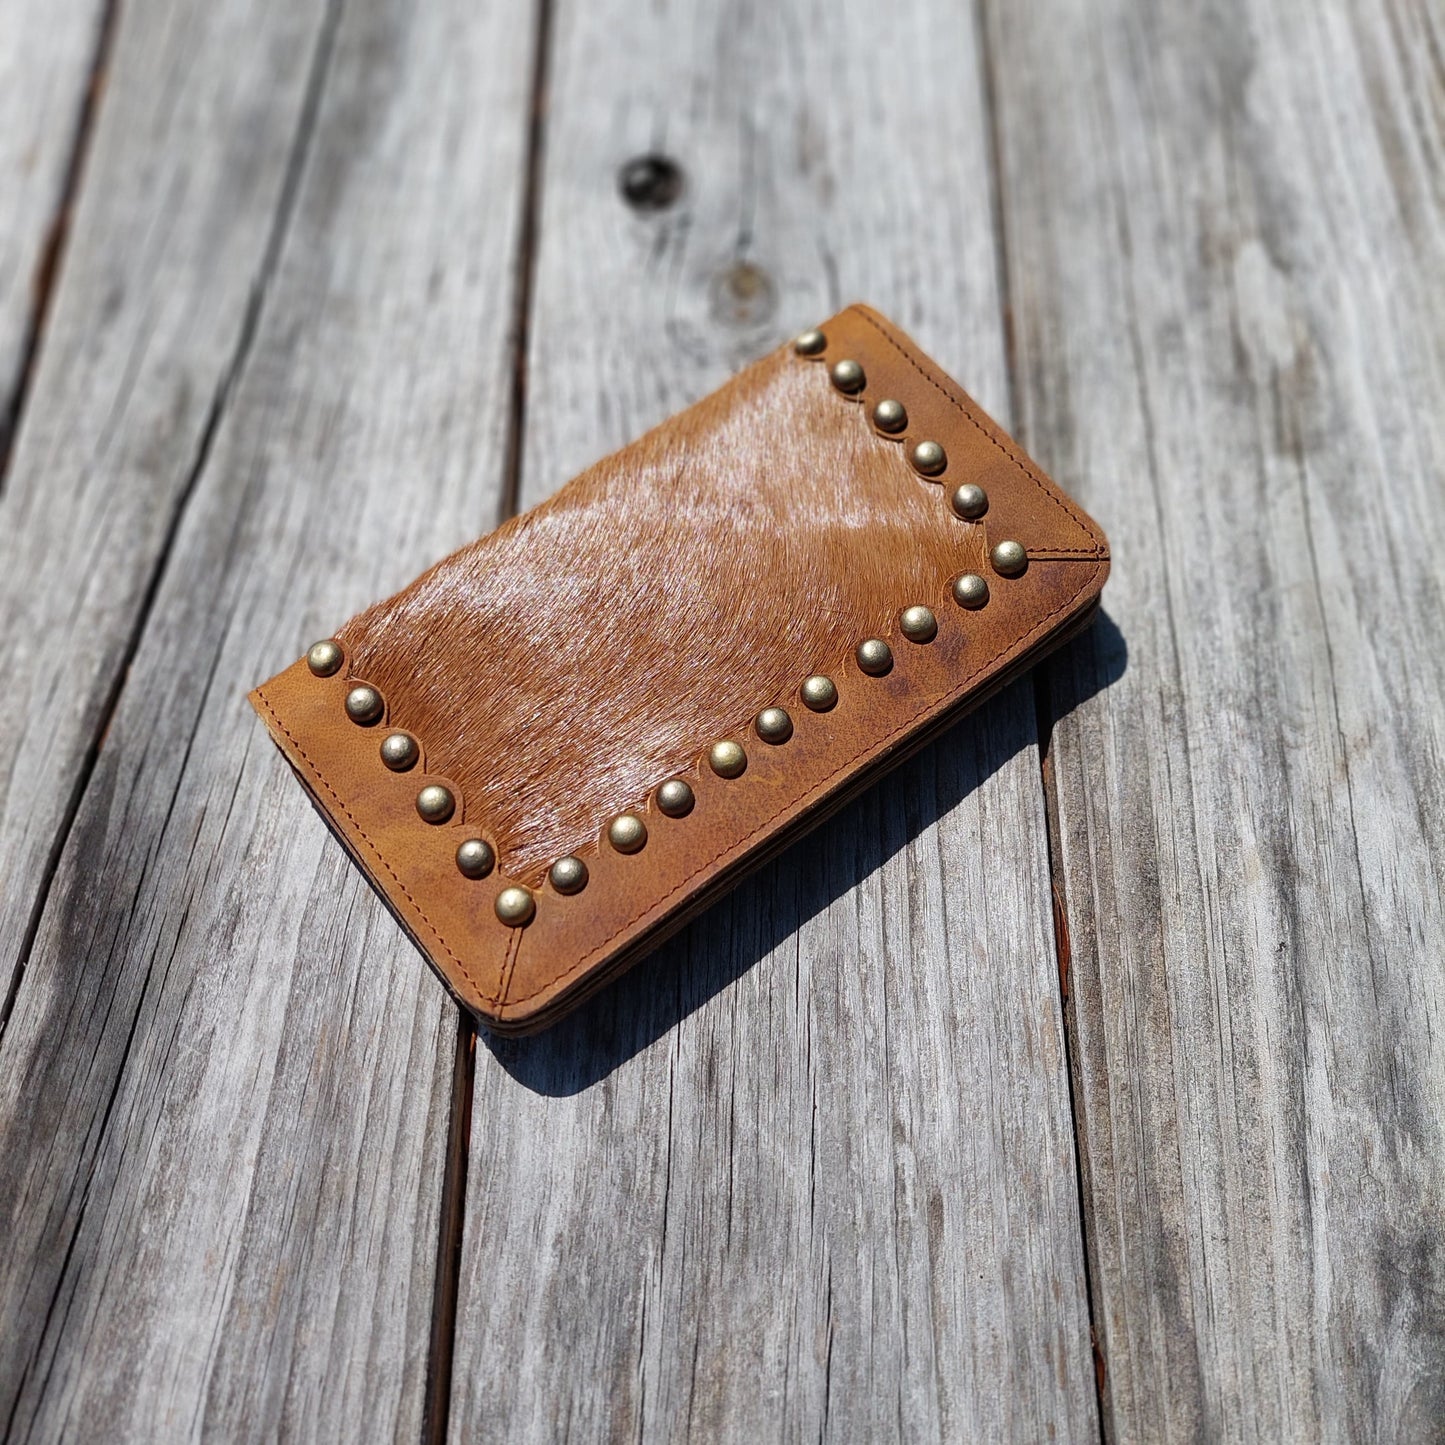 Long cowhide and leather wallet two snap closure | scalloped leather trim around walled decorated with brass studs | handmade | Western wallet | unisex | Etsy 